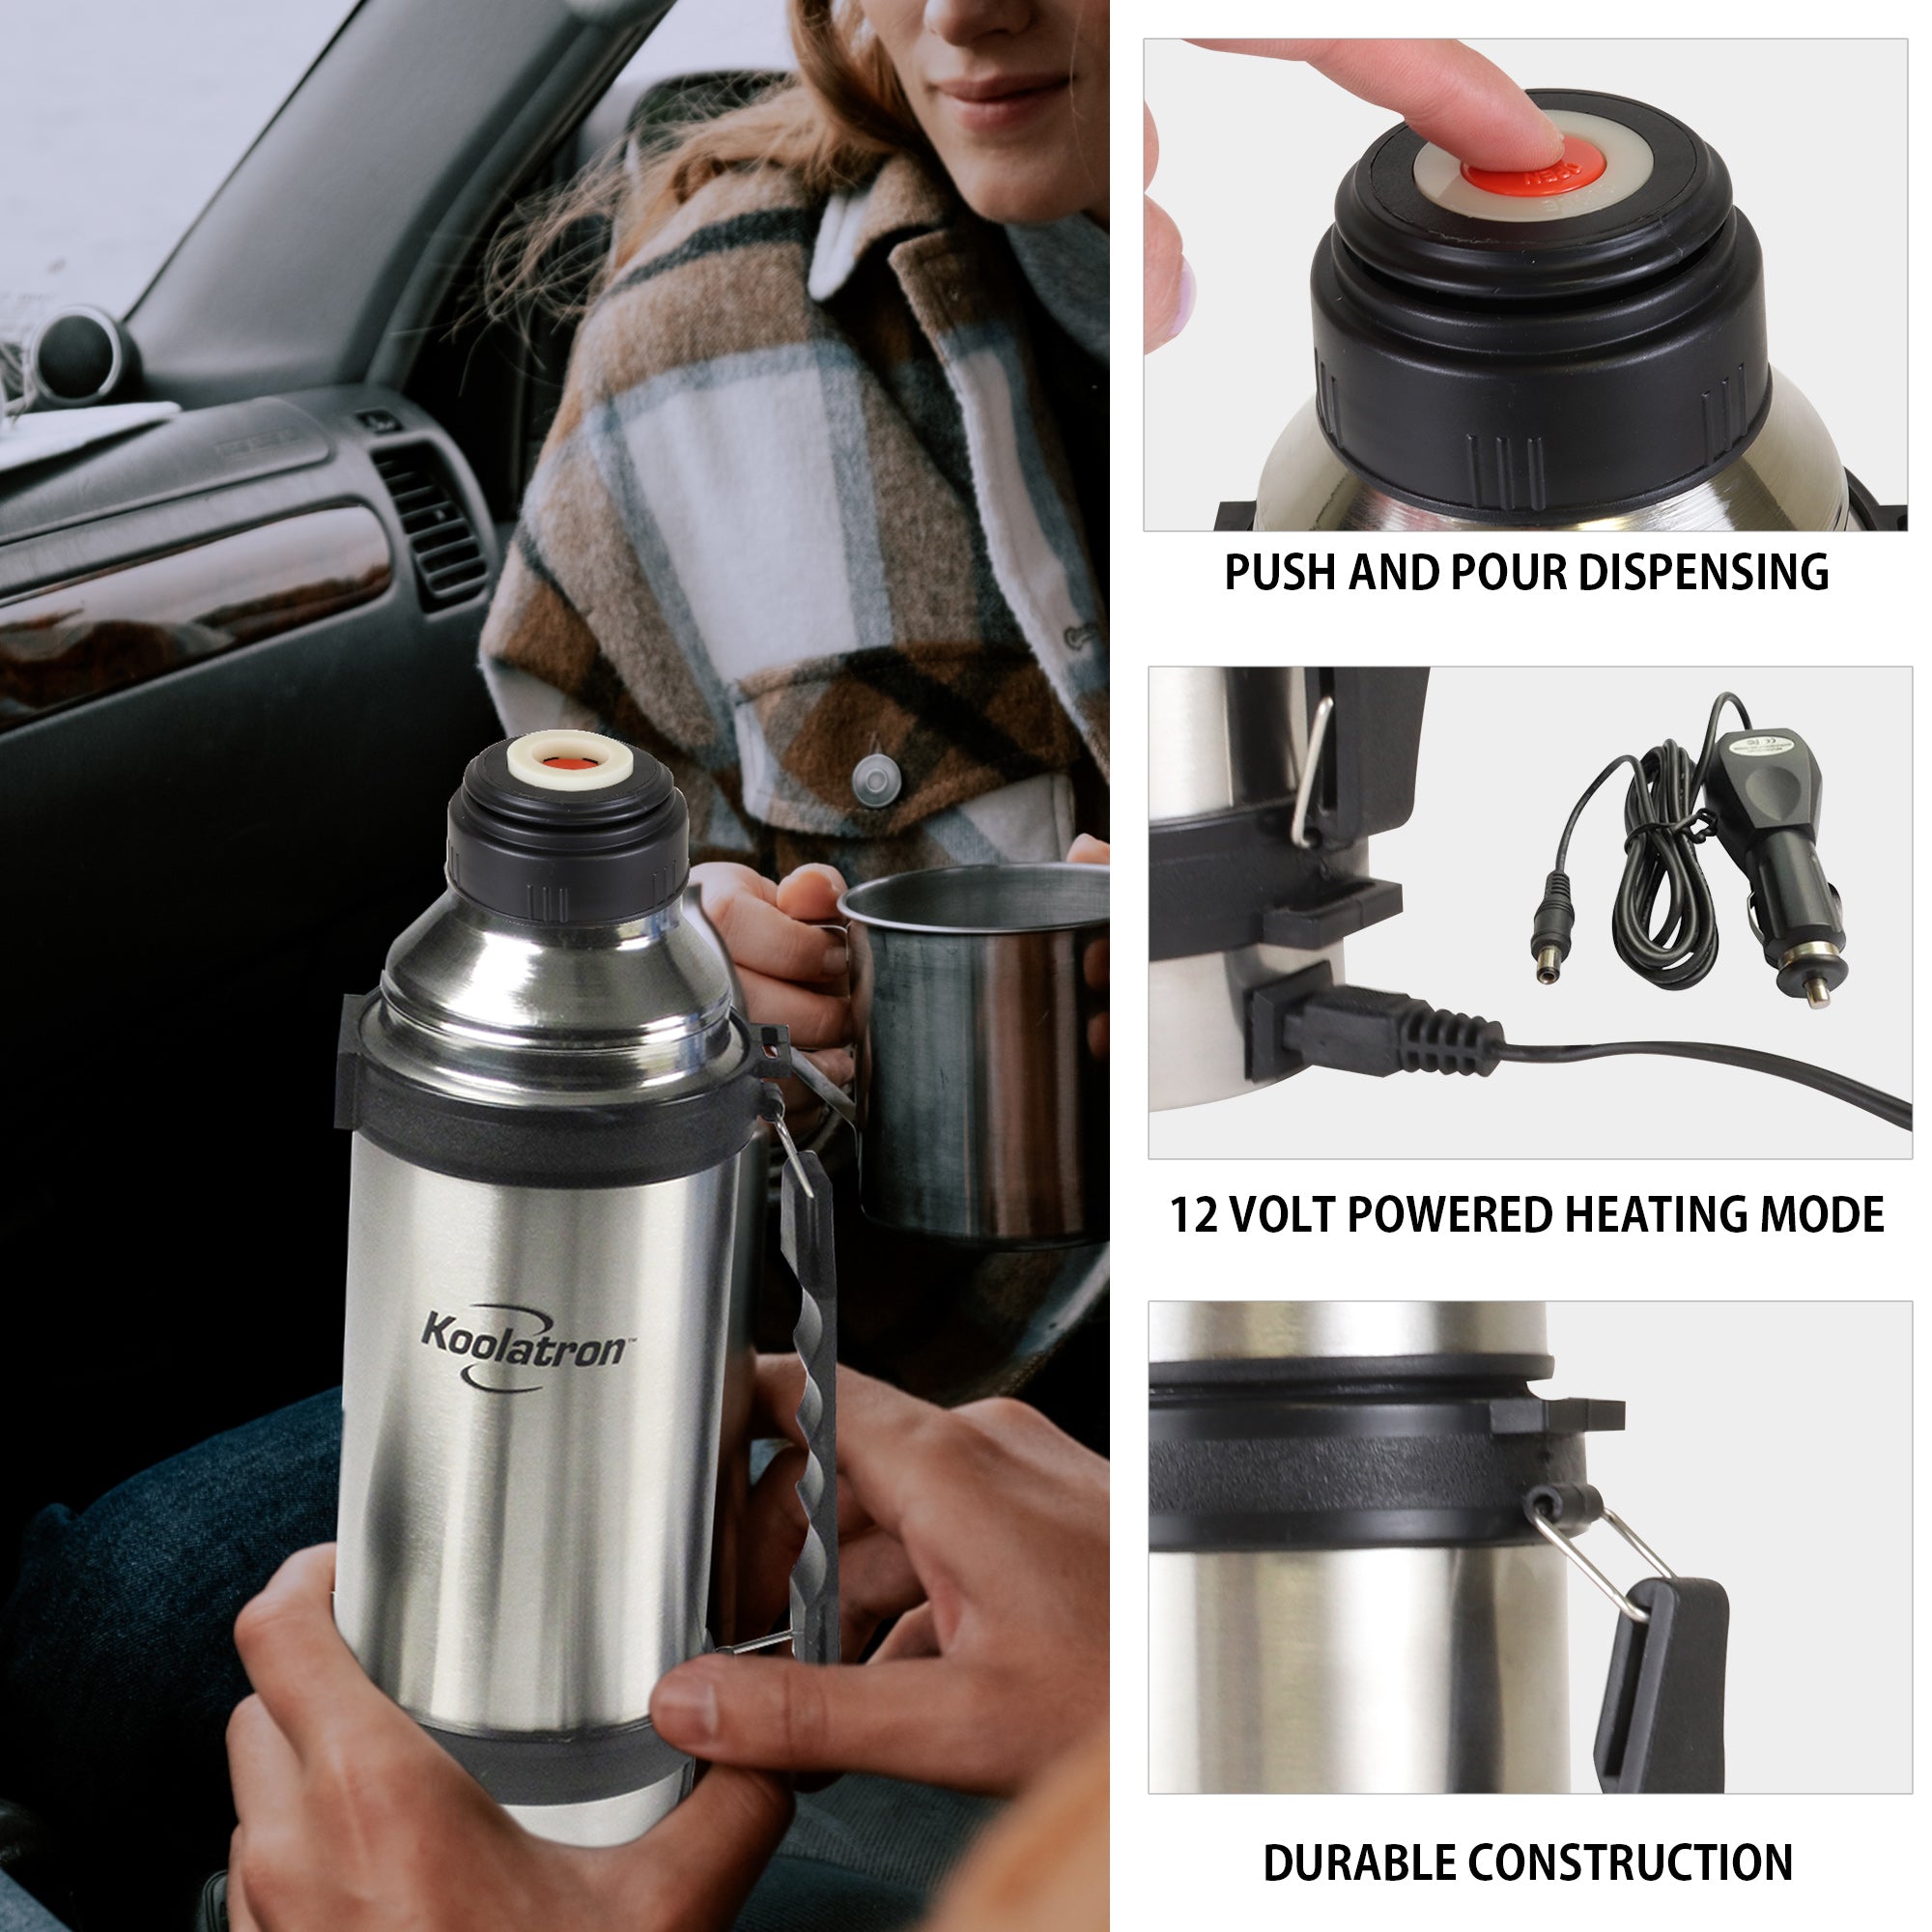 On the left is a lifestyle image of a person with light skin and long brown hair wearing a brown and white plaid coat and holding a stainless steel mug  sitting in the passenger seat of a car. In the foreground, the driver's hands are visible holding the 12V travel flask. Three closeup images on the right show features of the thermos bottle, labeled: 1. Push and pour dispensing; 2. 12 volt powered heating mode; 3. Durable construction.